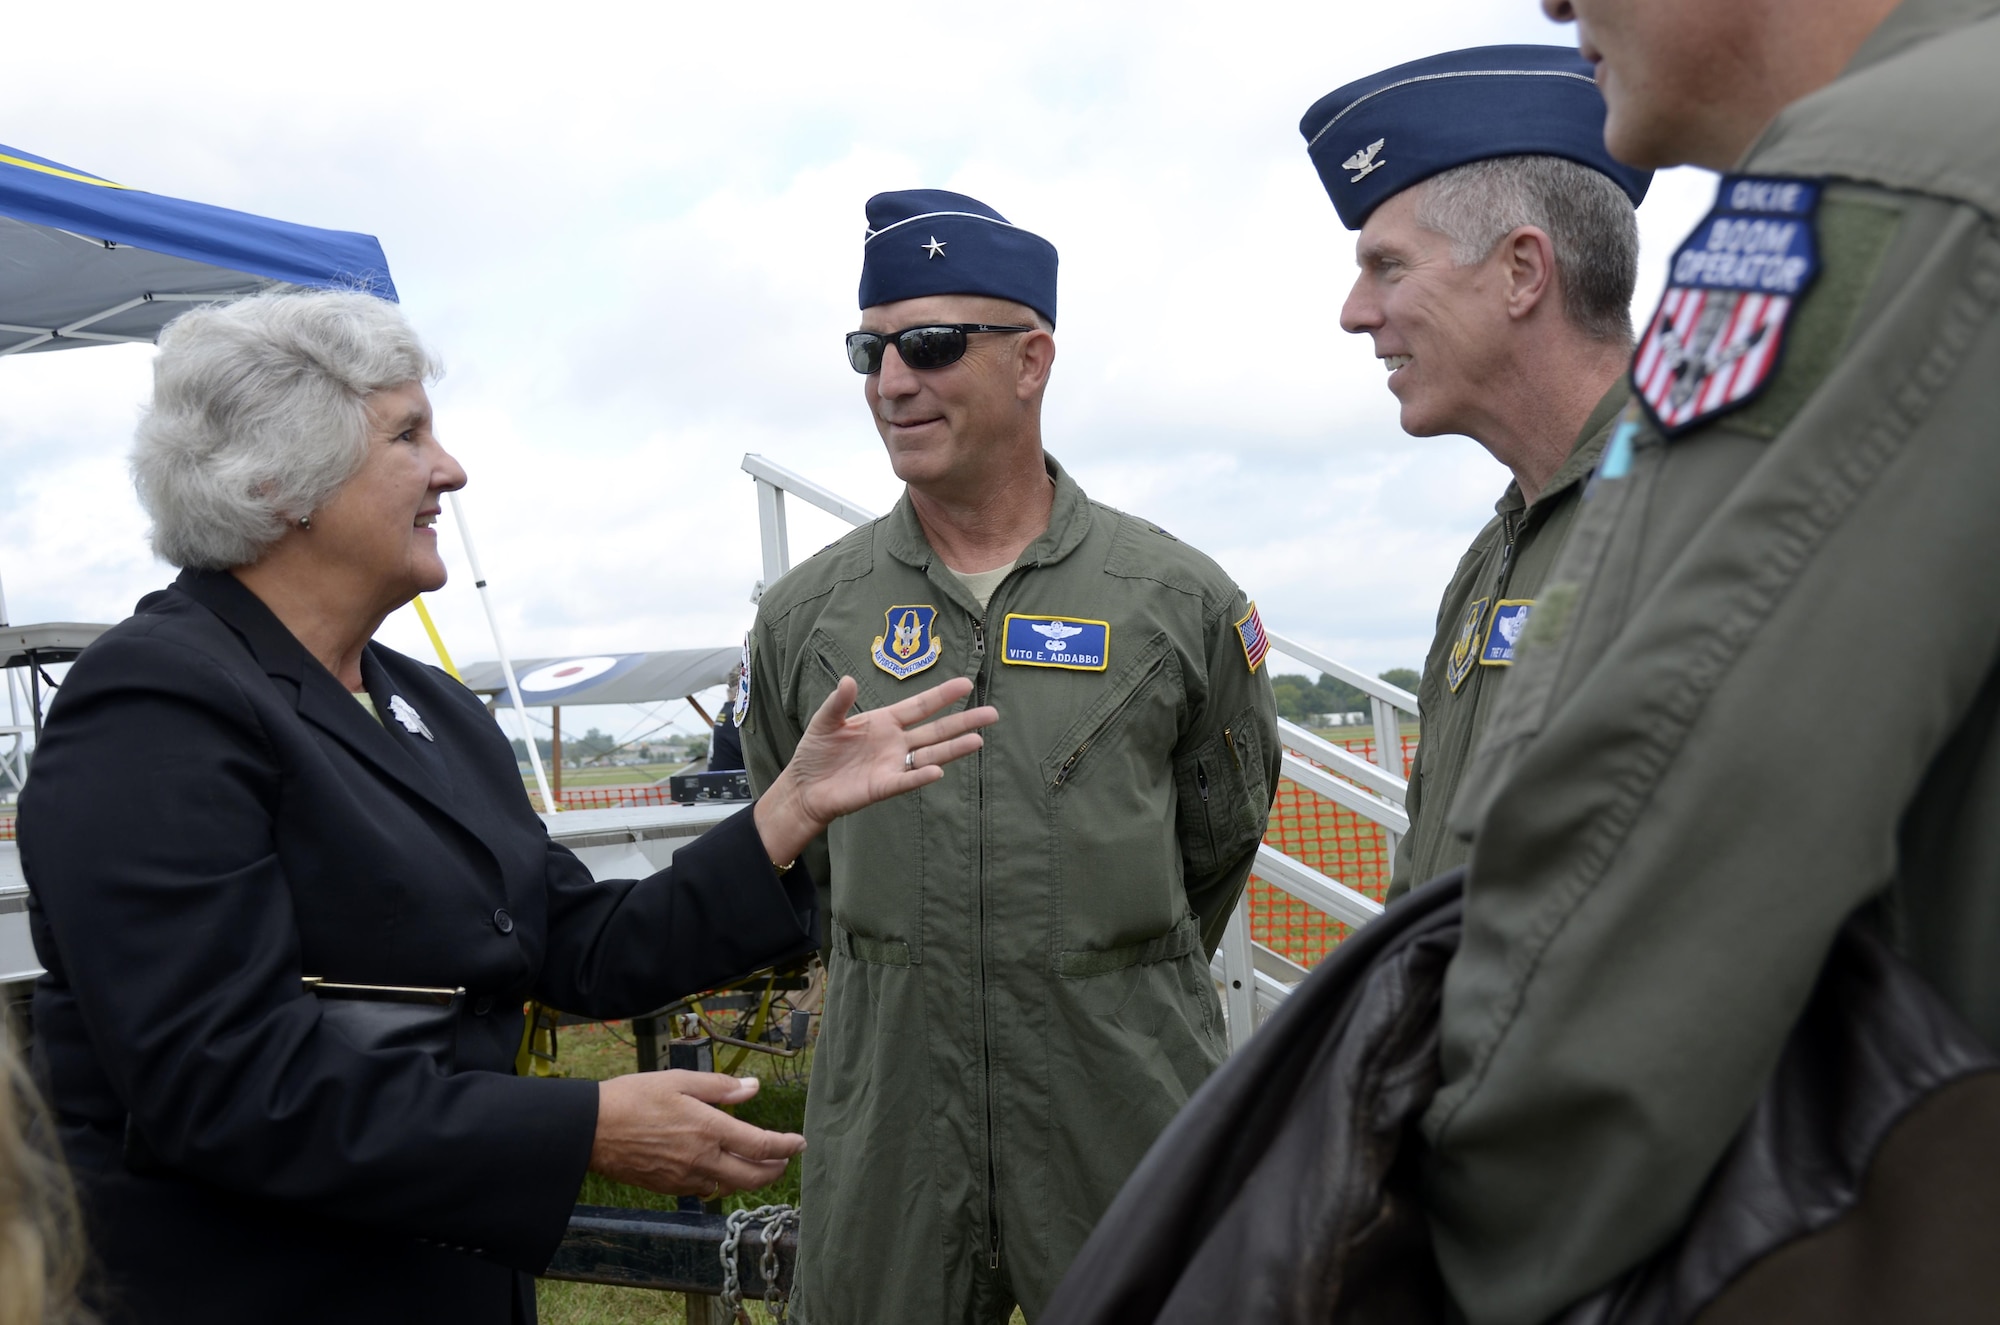 Susan d’Olive, daughter of 1st Lt. Charles d’Olive, the last officially recognized U.S. “Ace” of World War I, shares some memories with Brig. Gen. Vito Addabbo, Mobilization Assistant to the Commander, Air Force Global Strike Command, Barksdale Air Force Base, Louisiana, and Lt. Col James Morriss, vice commander of the 307th Bomb Wing, Barksdale AFB, at the Dawn Patrol Rendezvous event held at the National Museum of the United States Air Force in Ohio, Oct. 1, 2016.  All three were part of a painting unveiling ceremony honoring d’Olive and 100 years of Reserve Airpower. (U.S. Air Force photo/Staff Sgt. Joel McCullough)